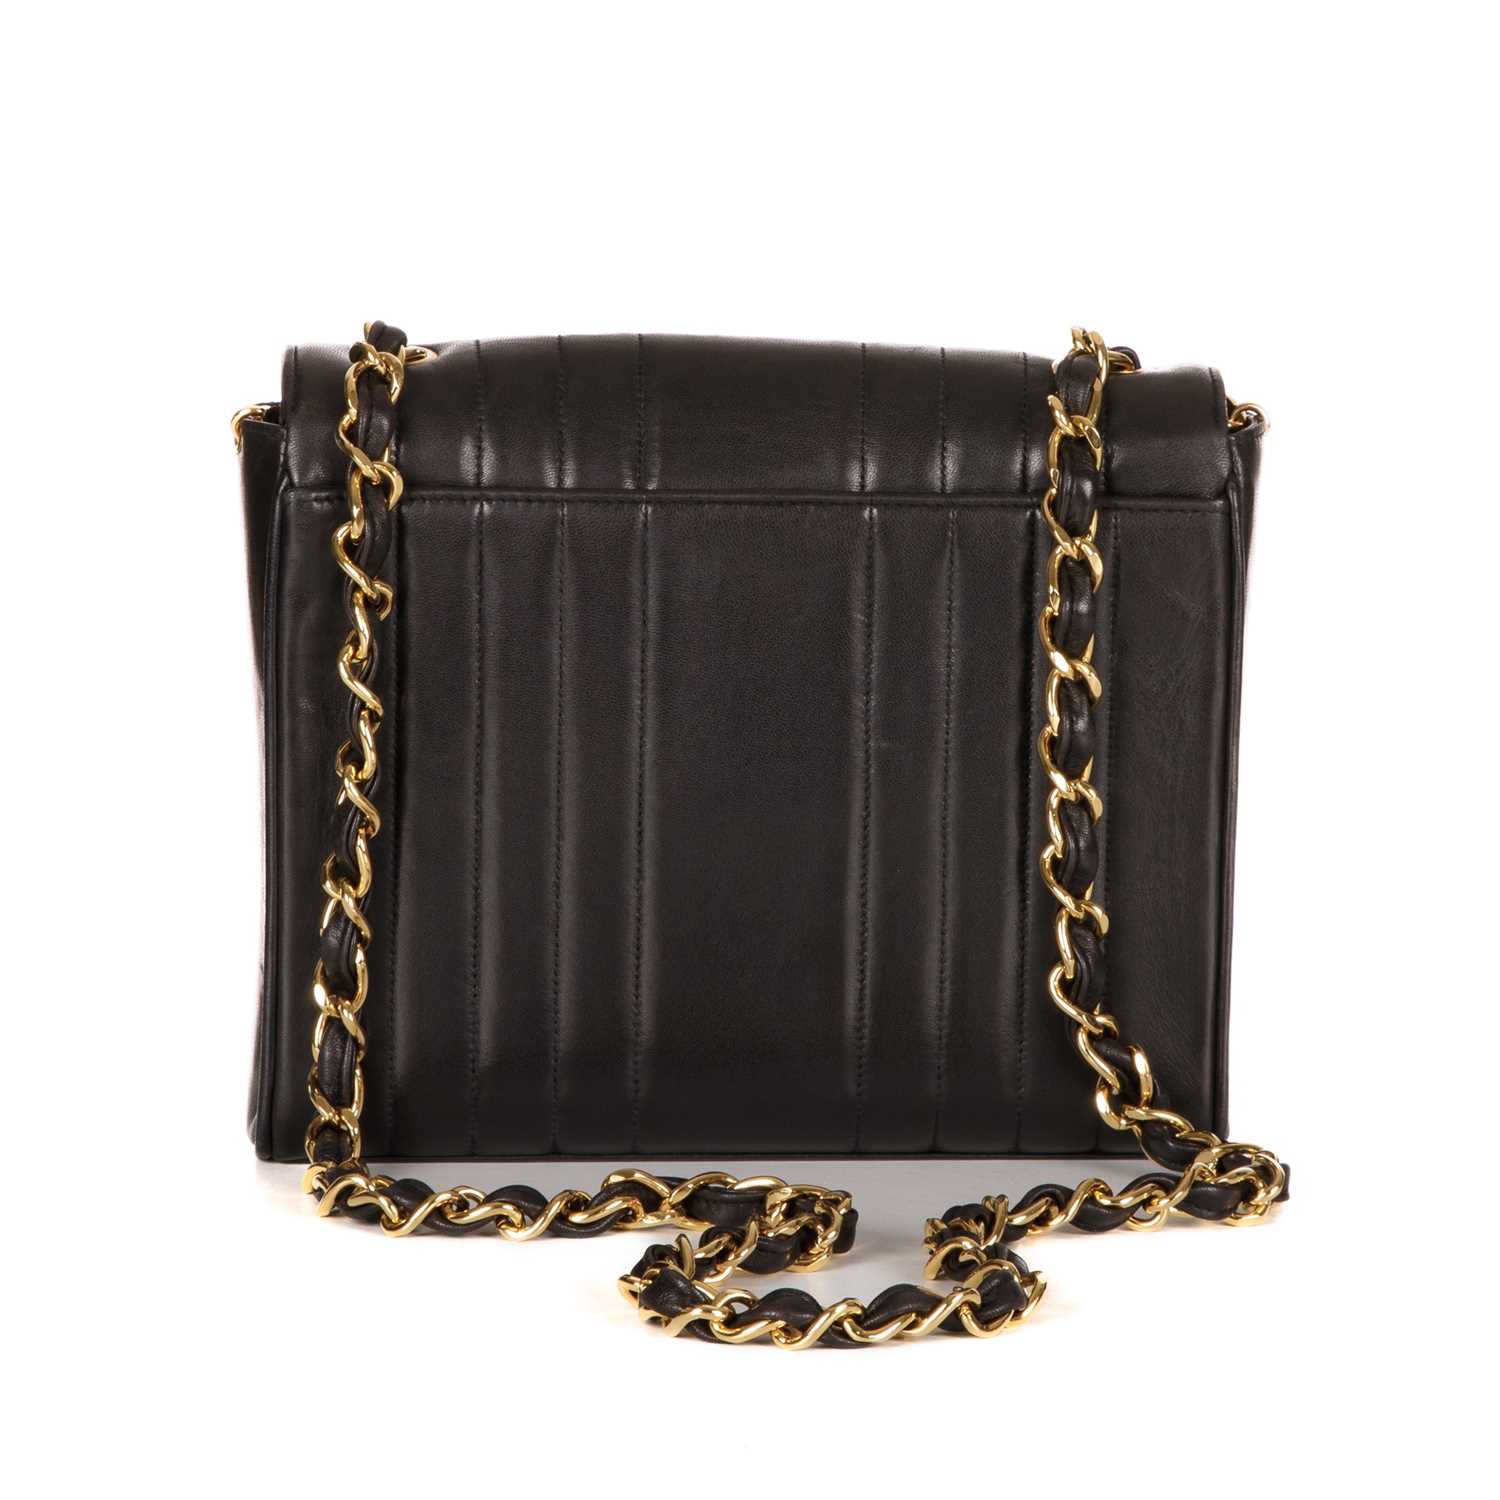 Chanel, a vintage vertical Classic Flap handbag, crafted from black lambskin leather, with - Image 2 of 5